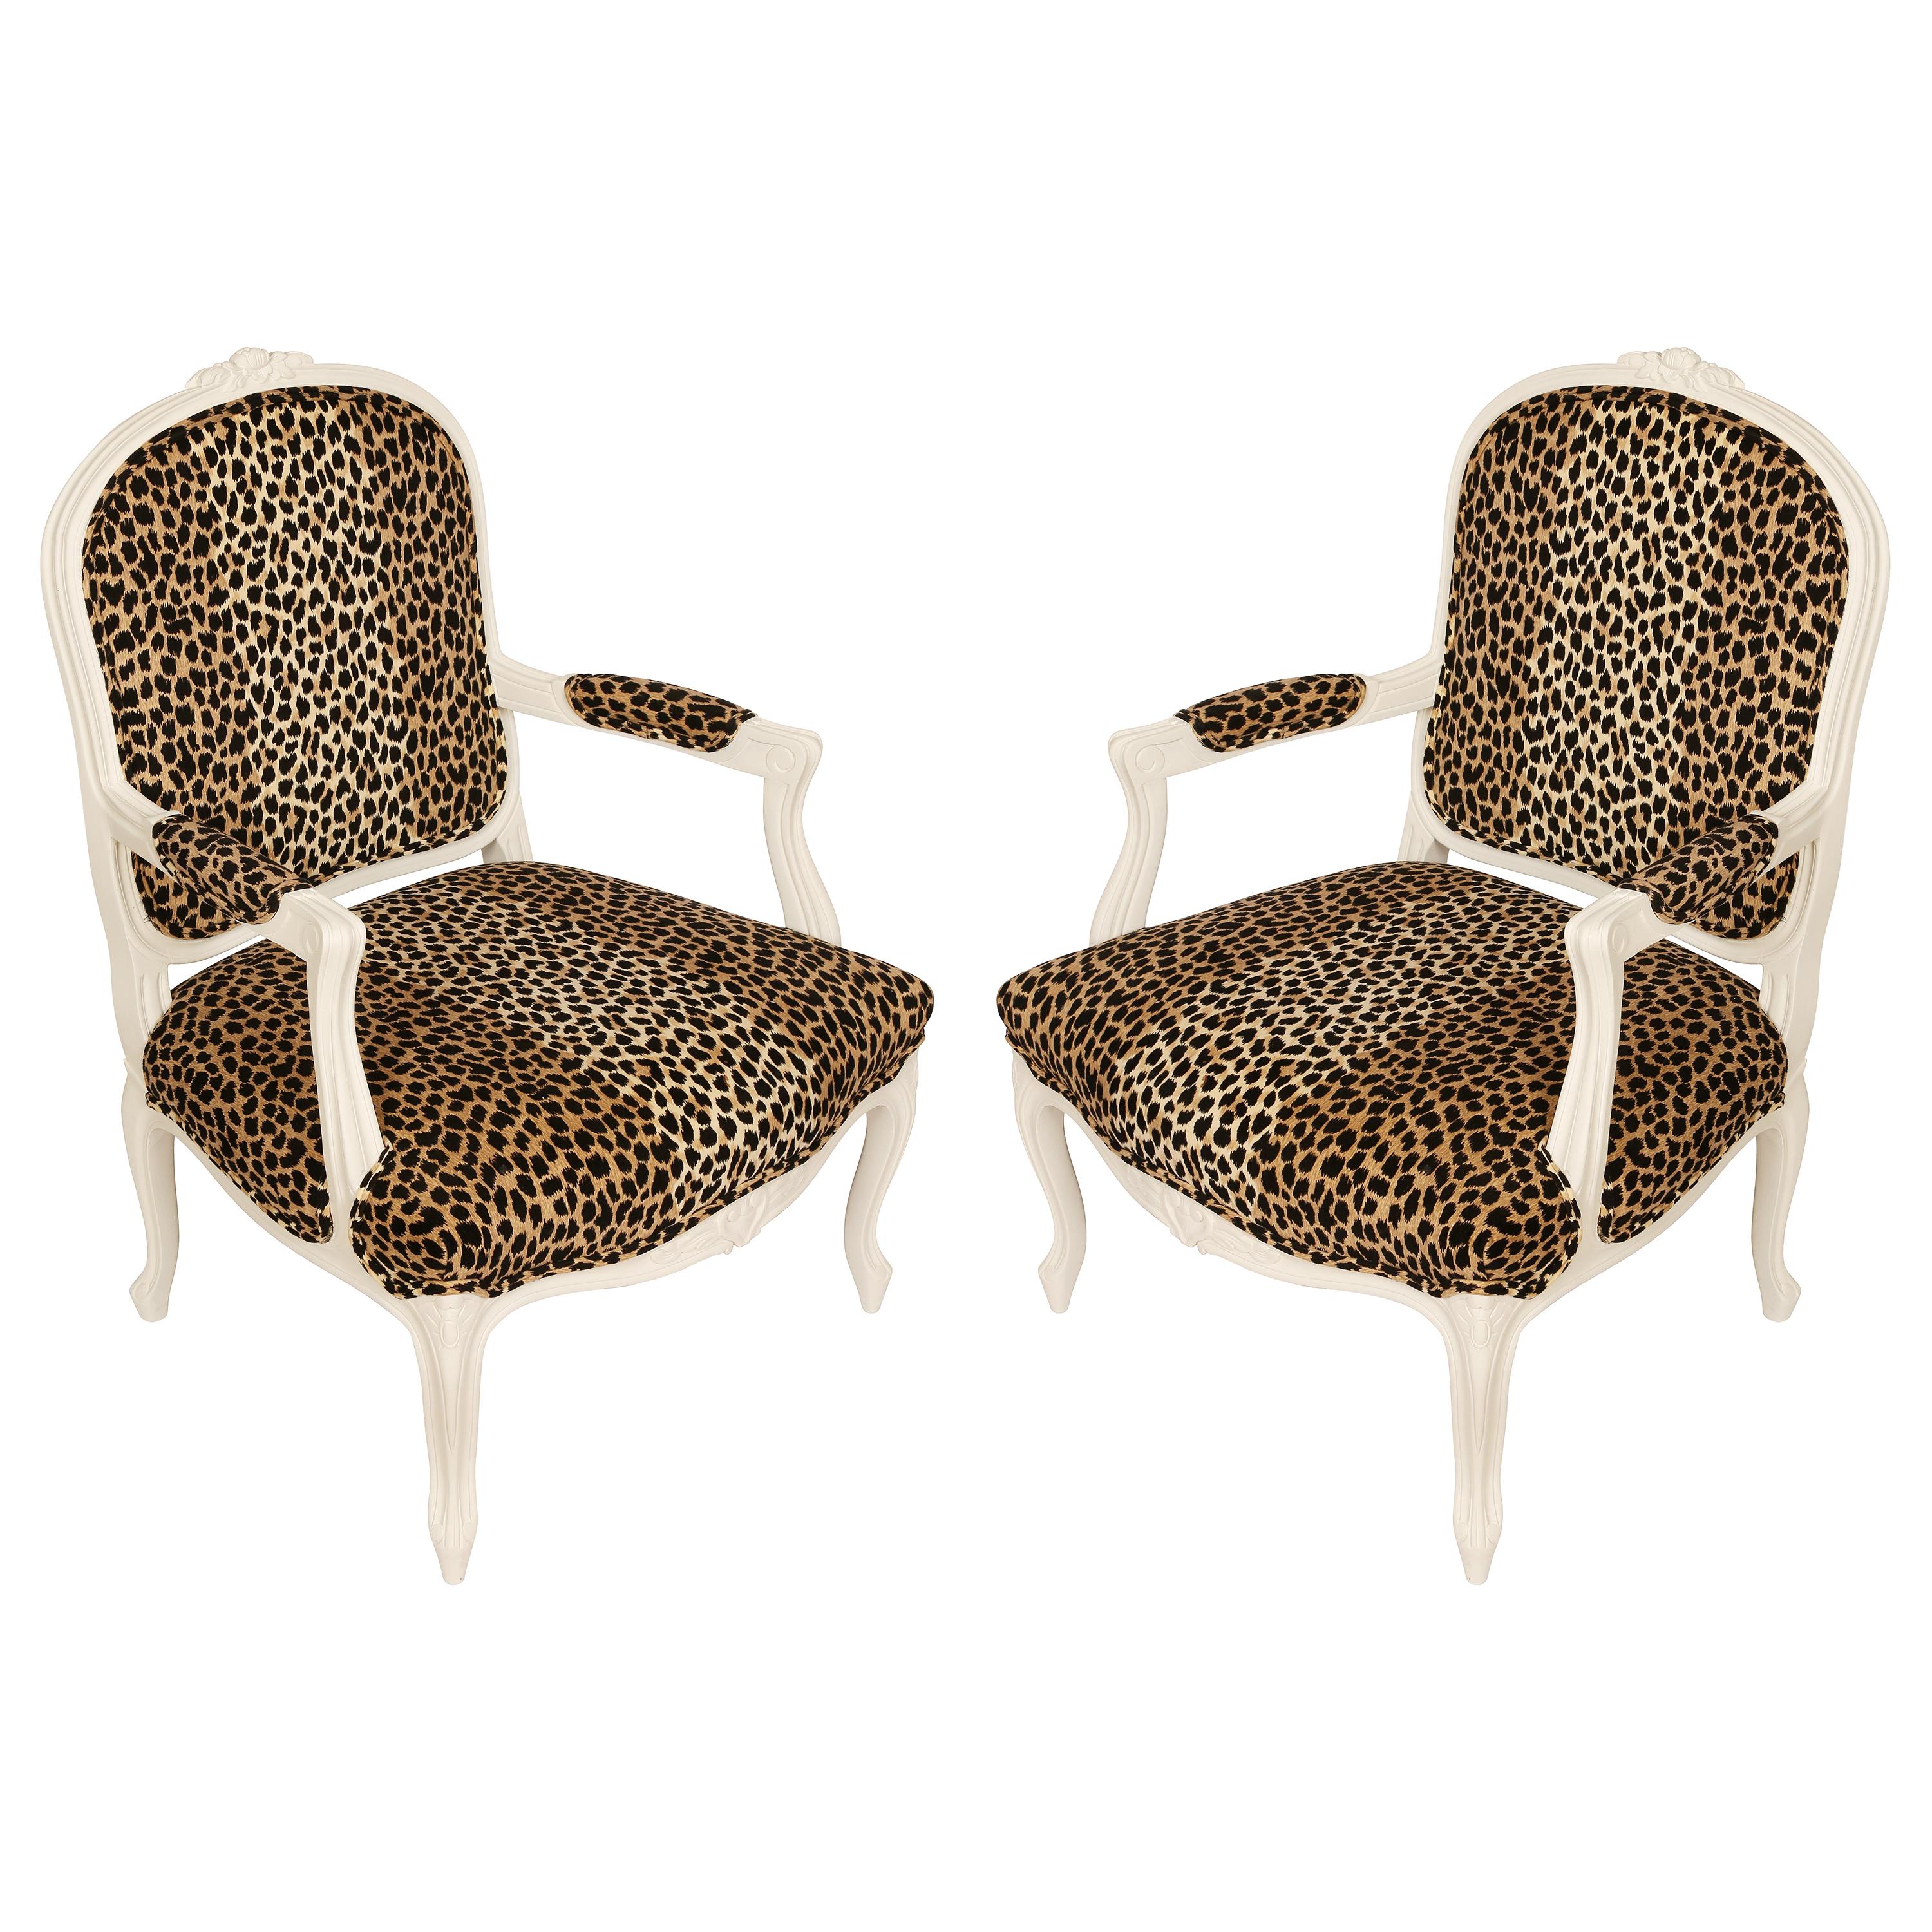 Pair of White Painted Louis XV Style Chairs in Leopard